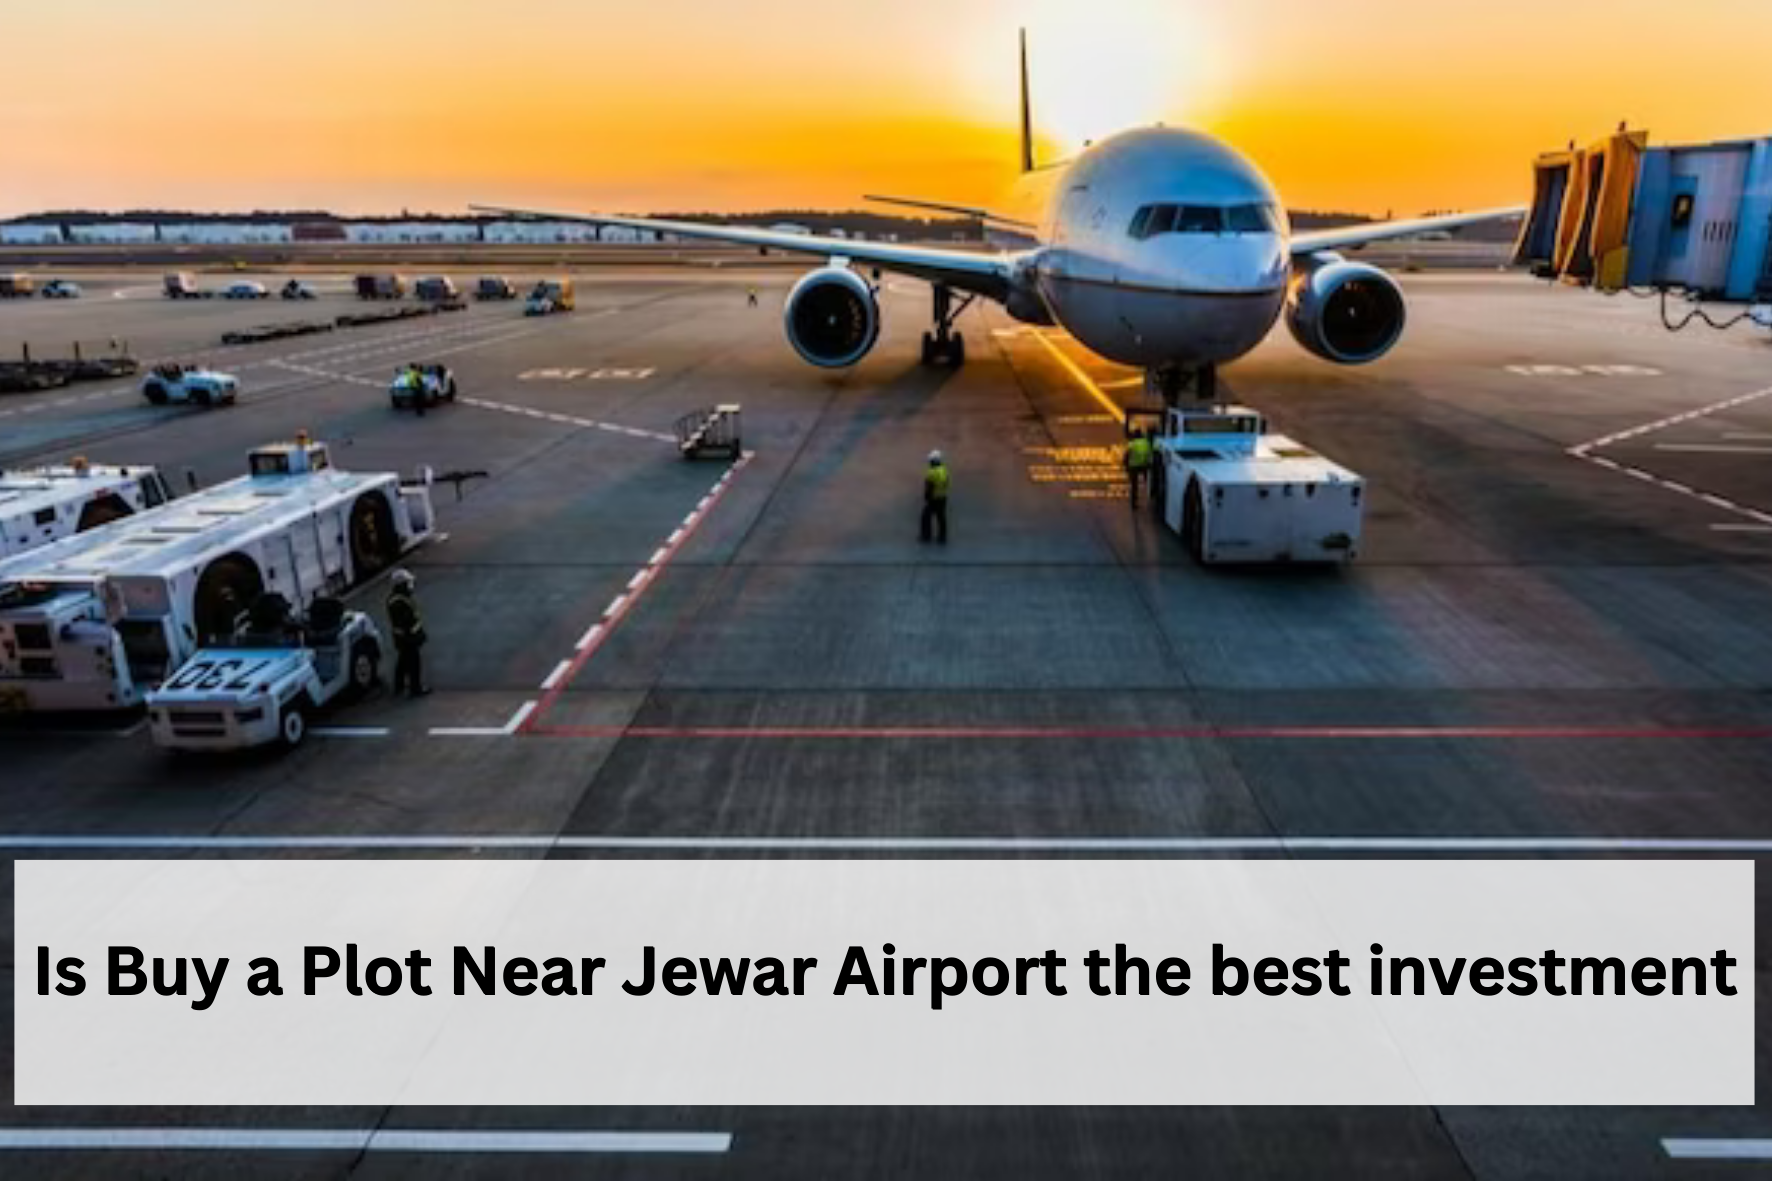 uploads/blog/Add_a_subheIs_Buy_a_Plot_Near_Jewar_Airport_the_best_investmentading.png